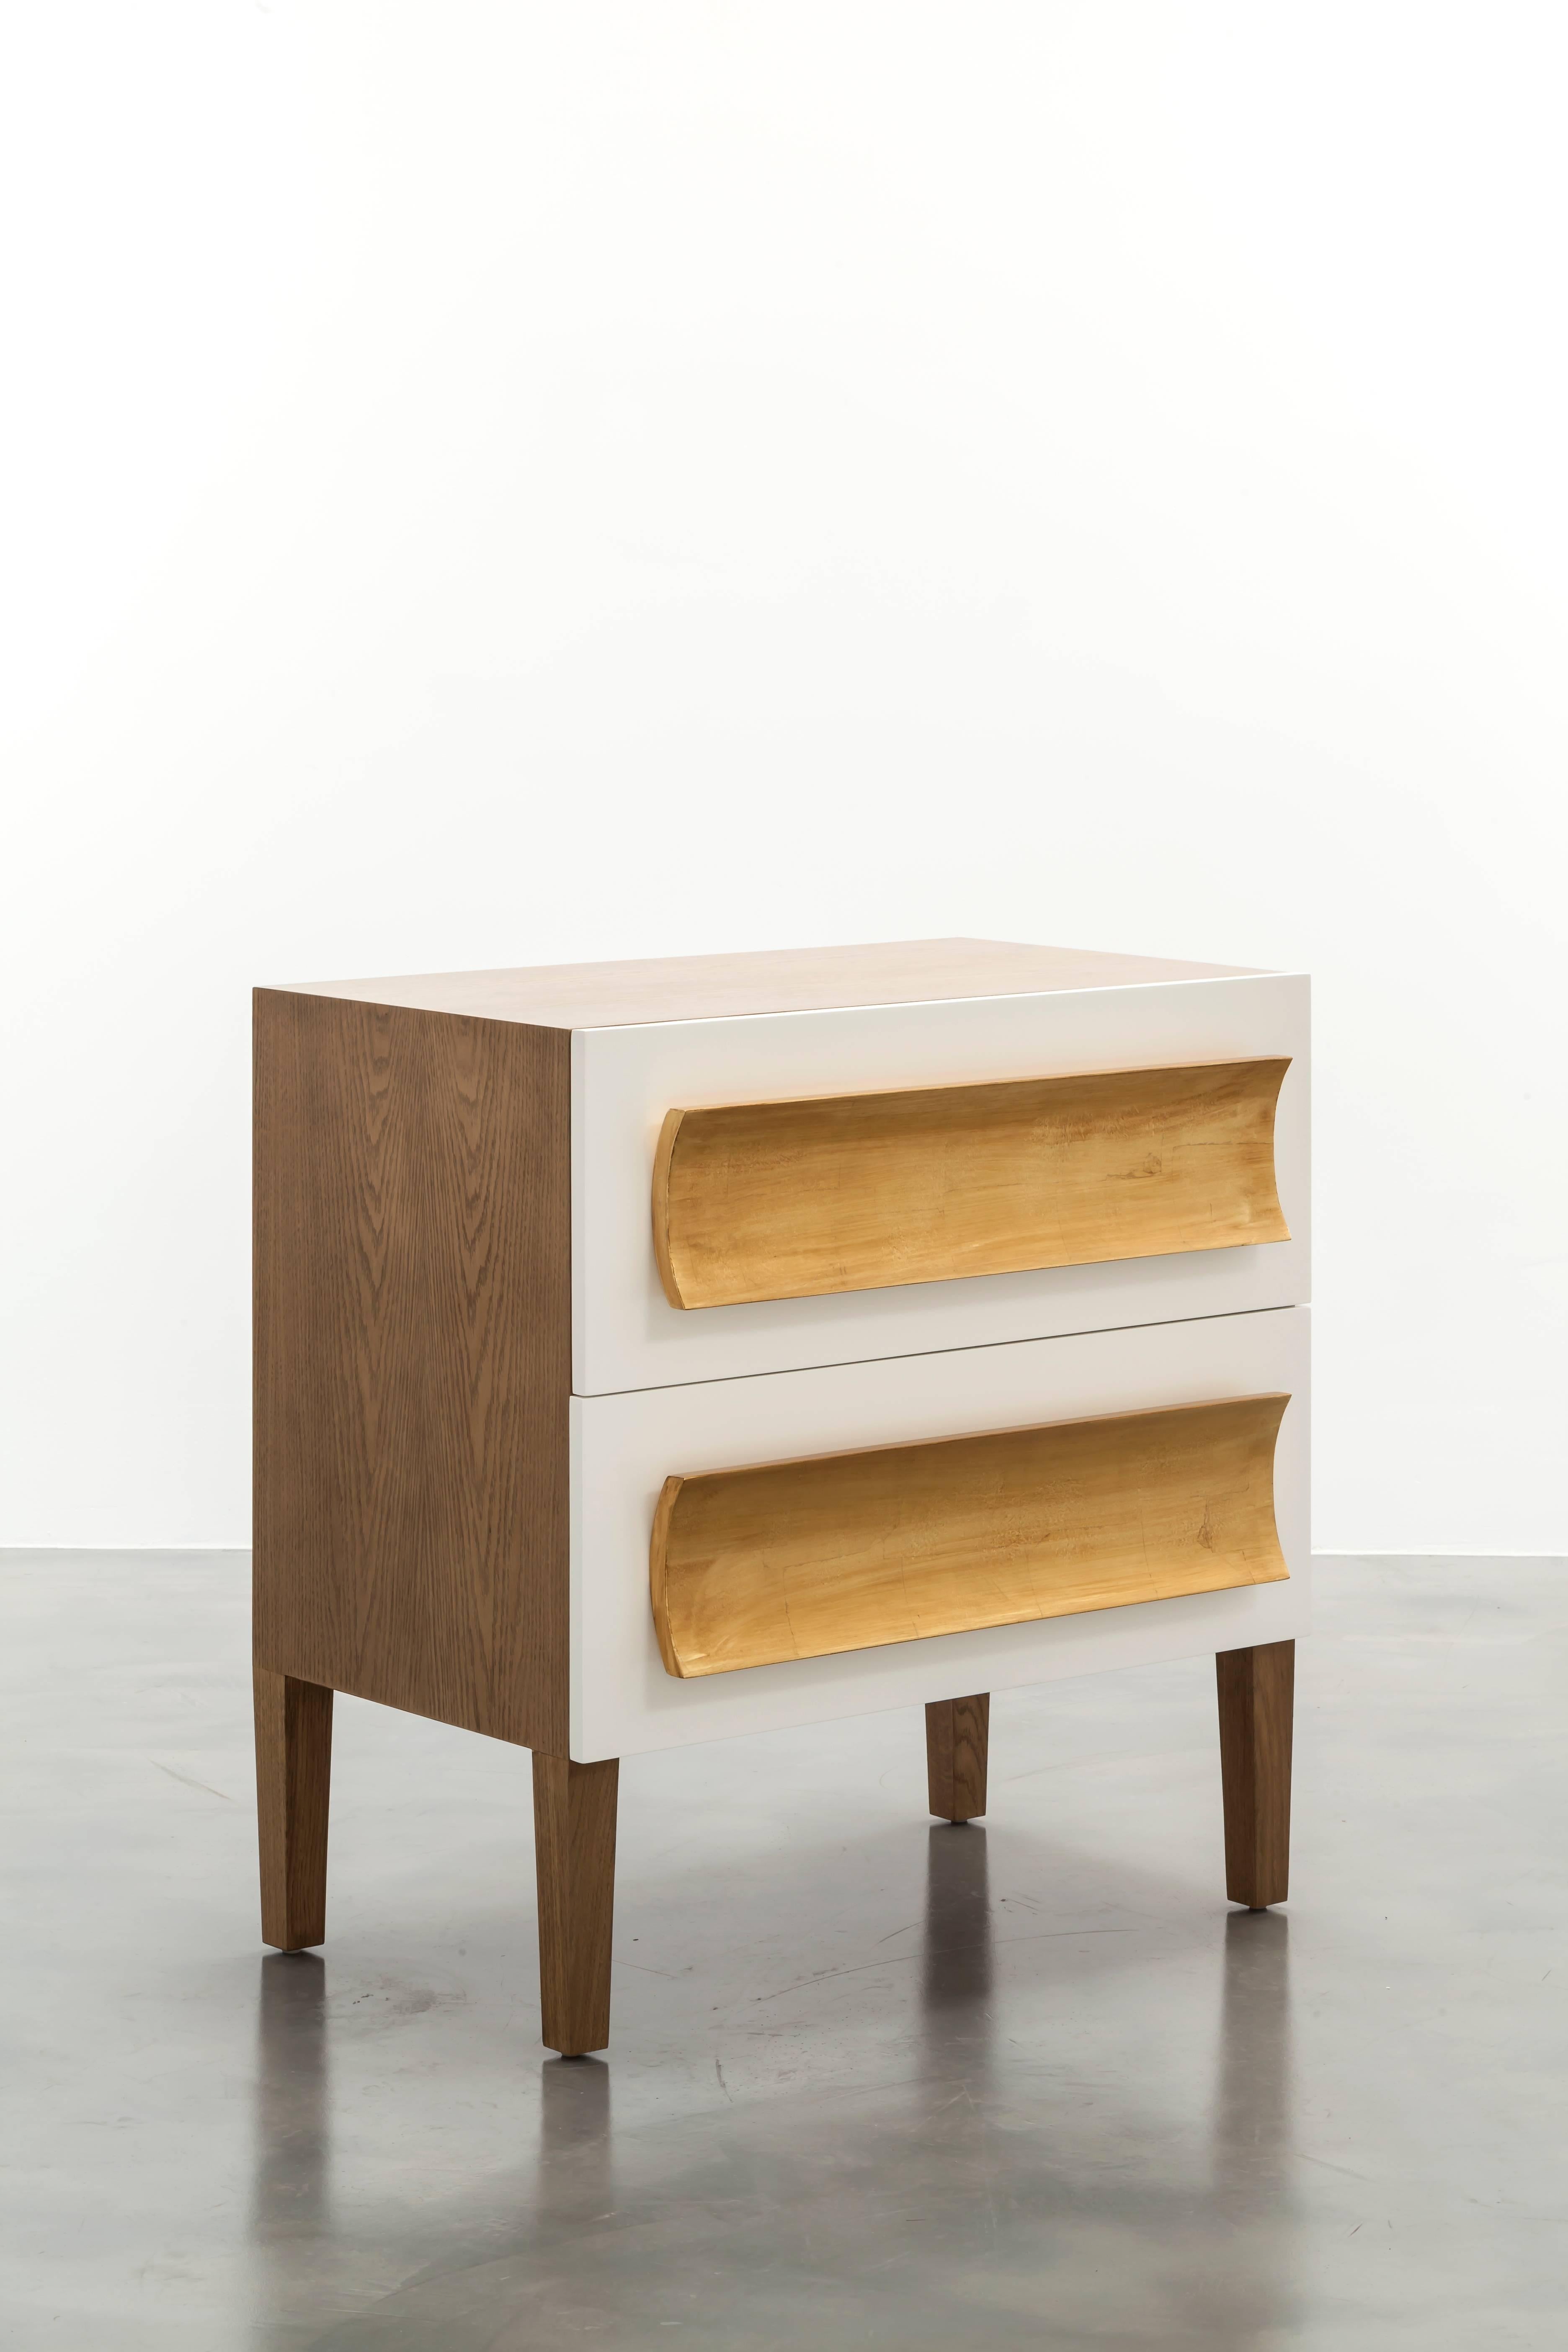 The Recaimer nightstand features a unique mixed finish design with an oak body, lacquer drawer fronts and gold leaf hand-carved pull details. Drawers are standard soft close with hidden glides. Showroom samples sold as is. Natural walnut with white